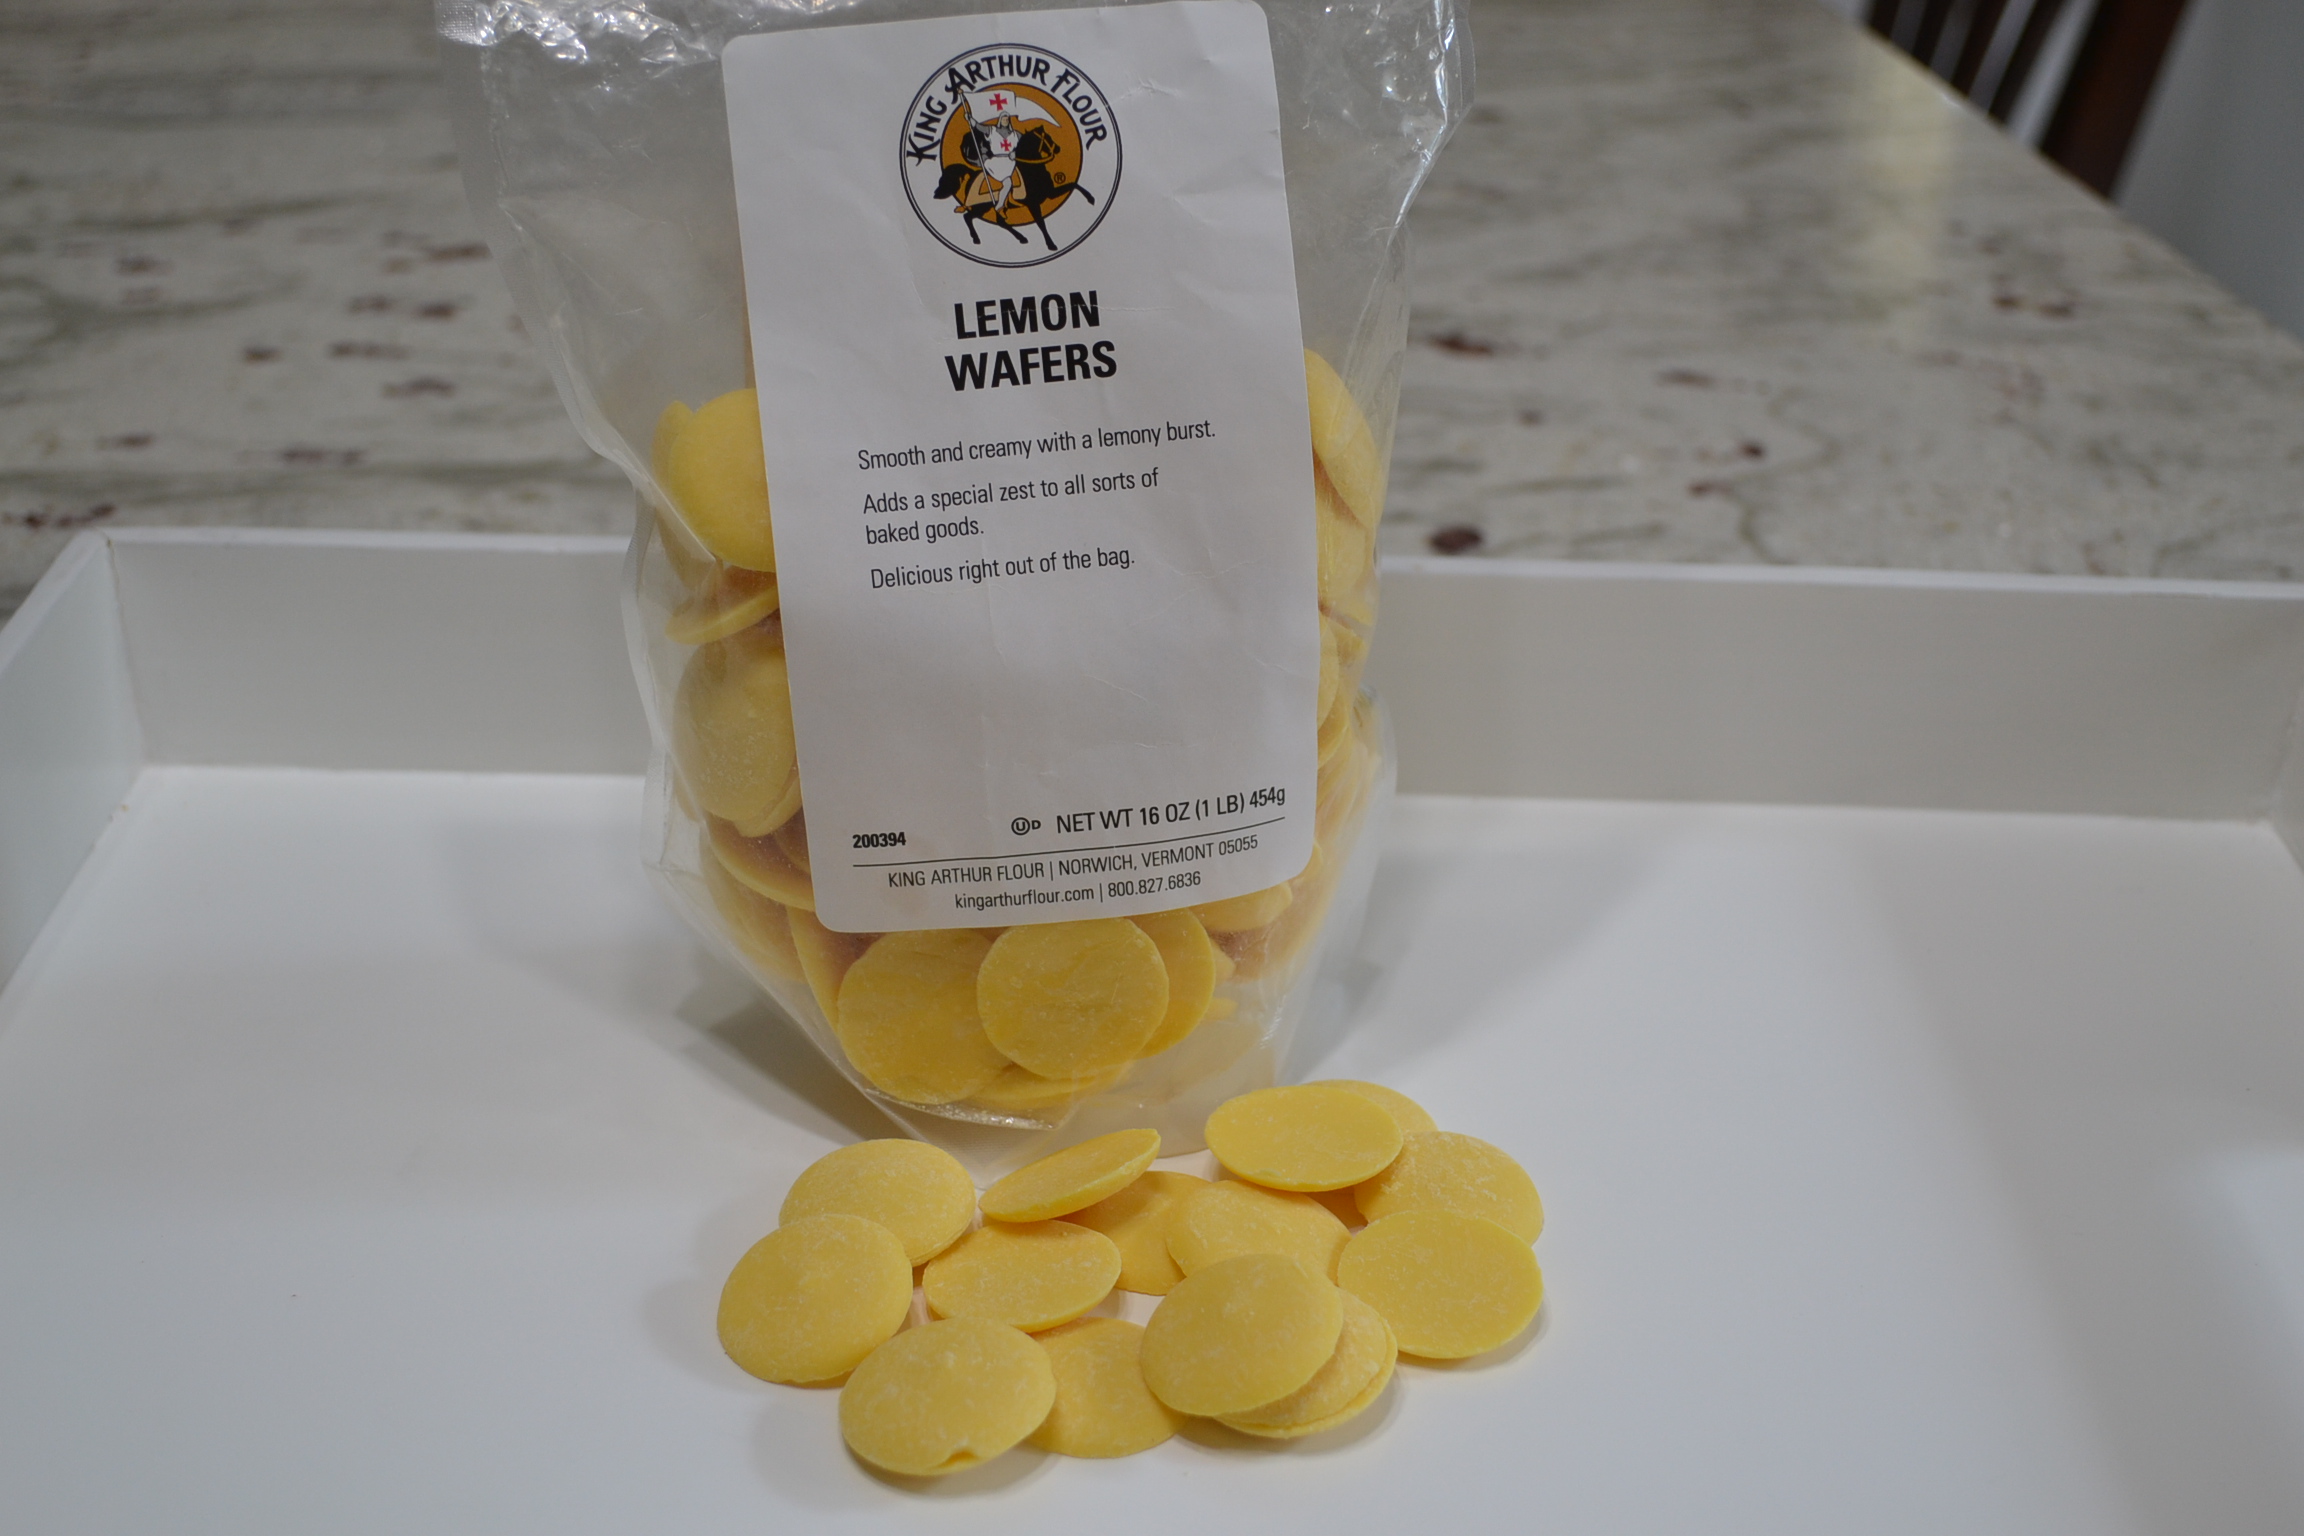 Lemon Burst Snickerdoodle Cookies are a delicious, lemon flavored variation of a snickerdoodle cookie.